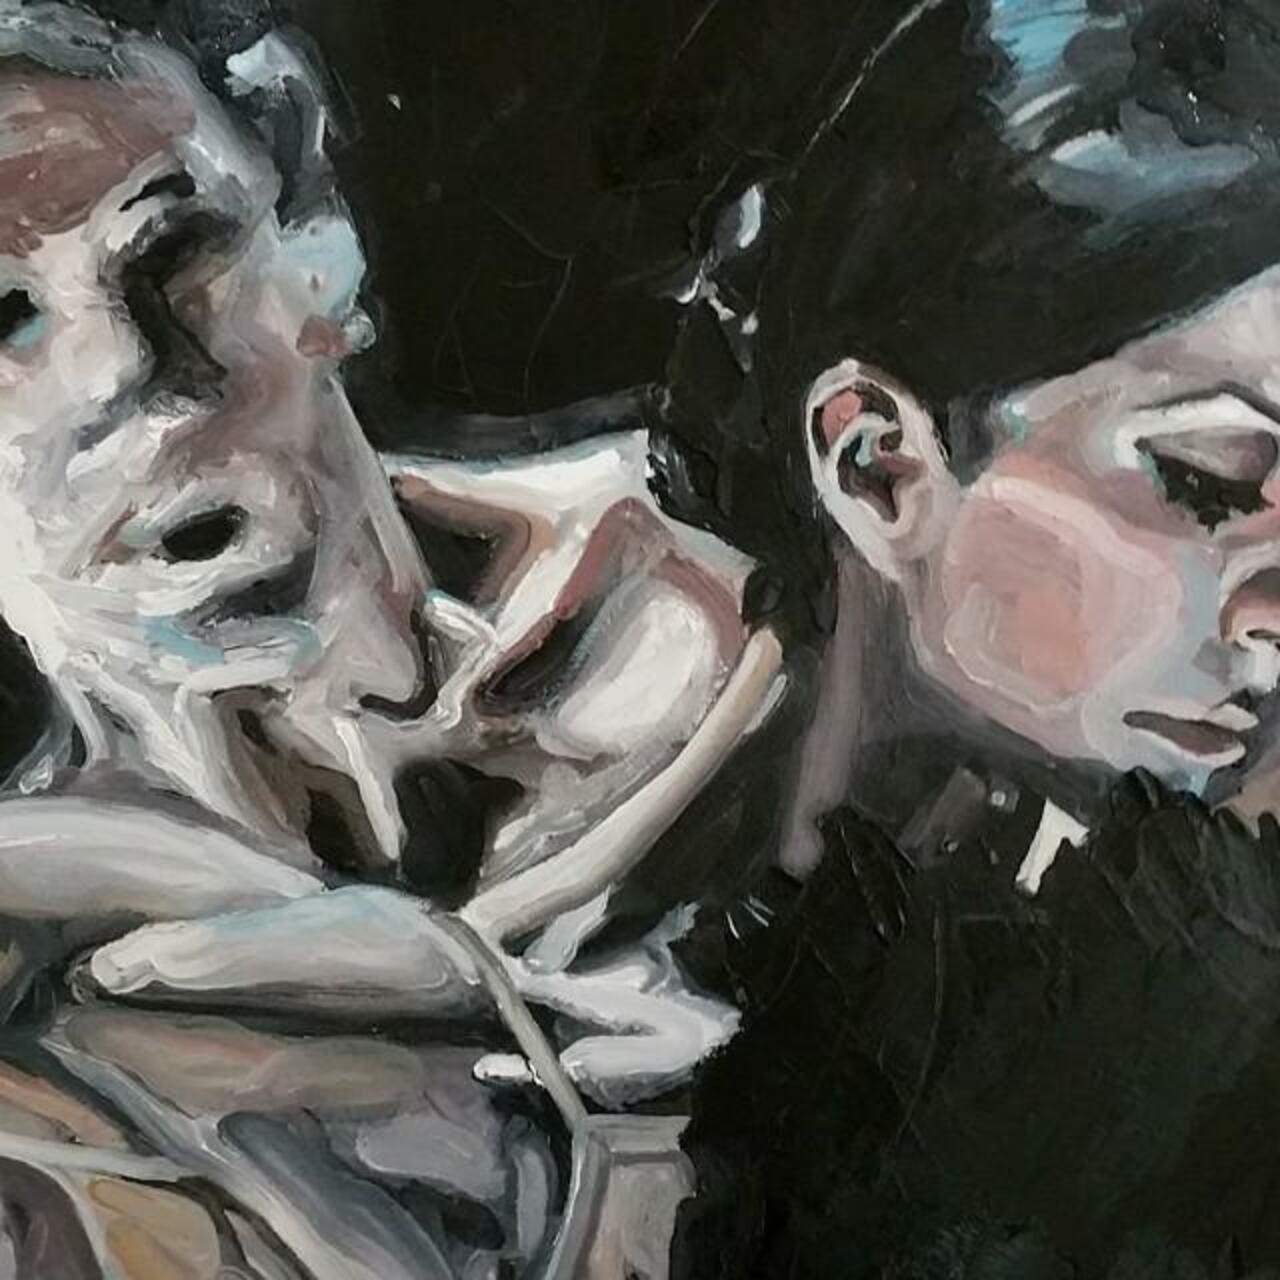 Detail from my most recent comission 

#art #detail #fineart #contemporaryart #painting #oilpainting #portrait #dan… http://t.co/ld2dgPevyG